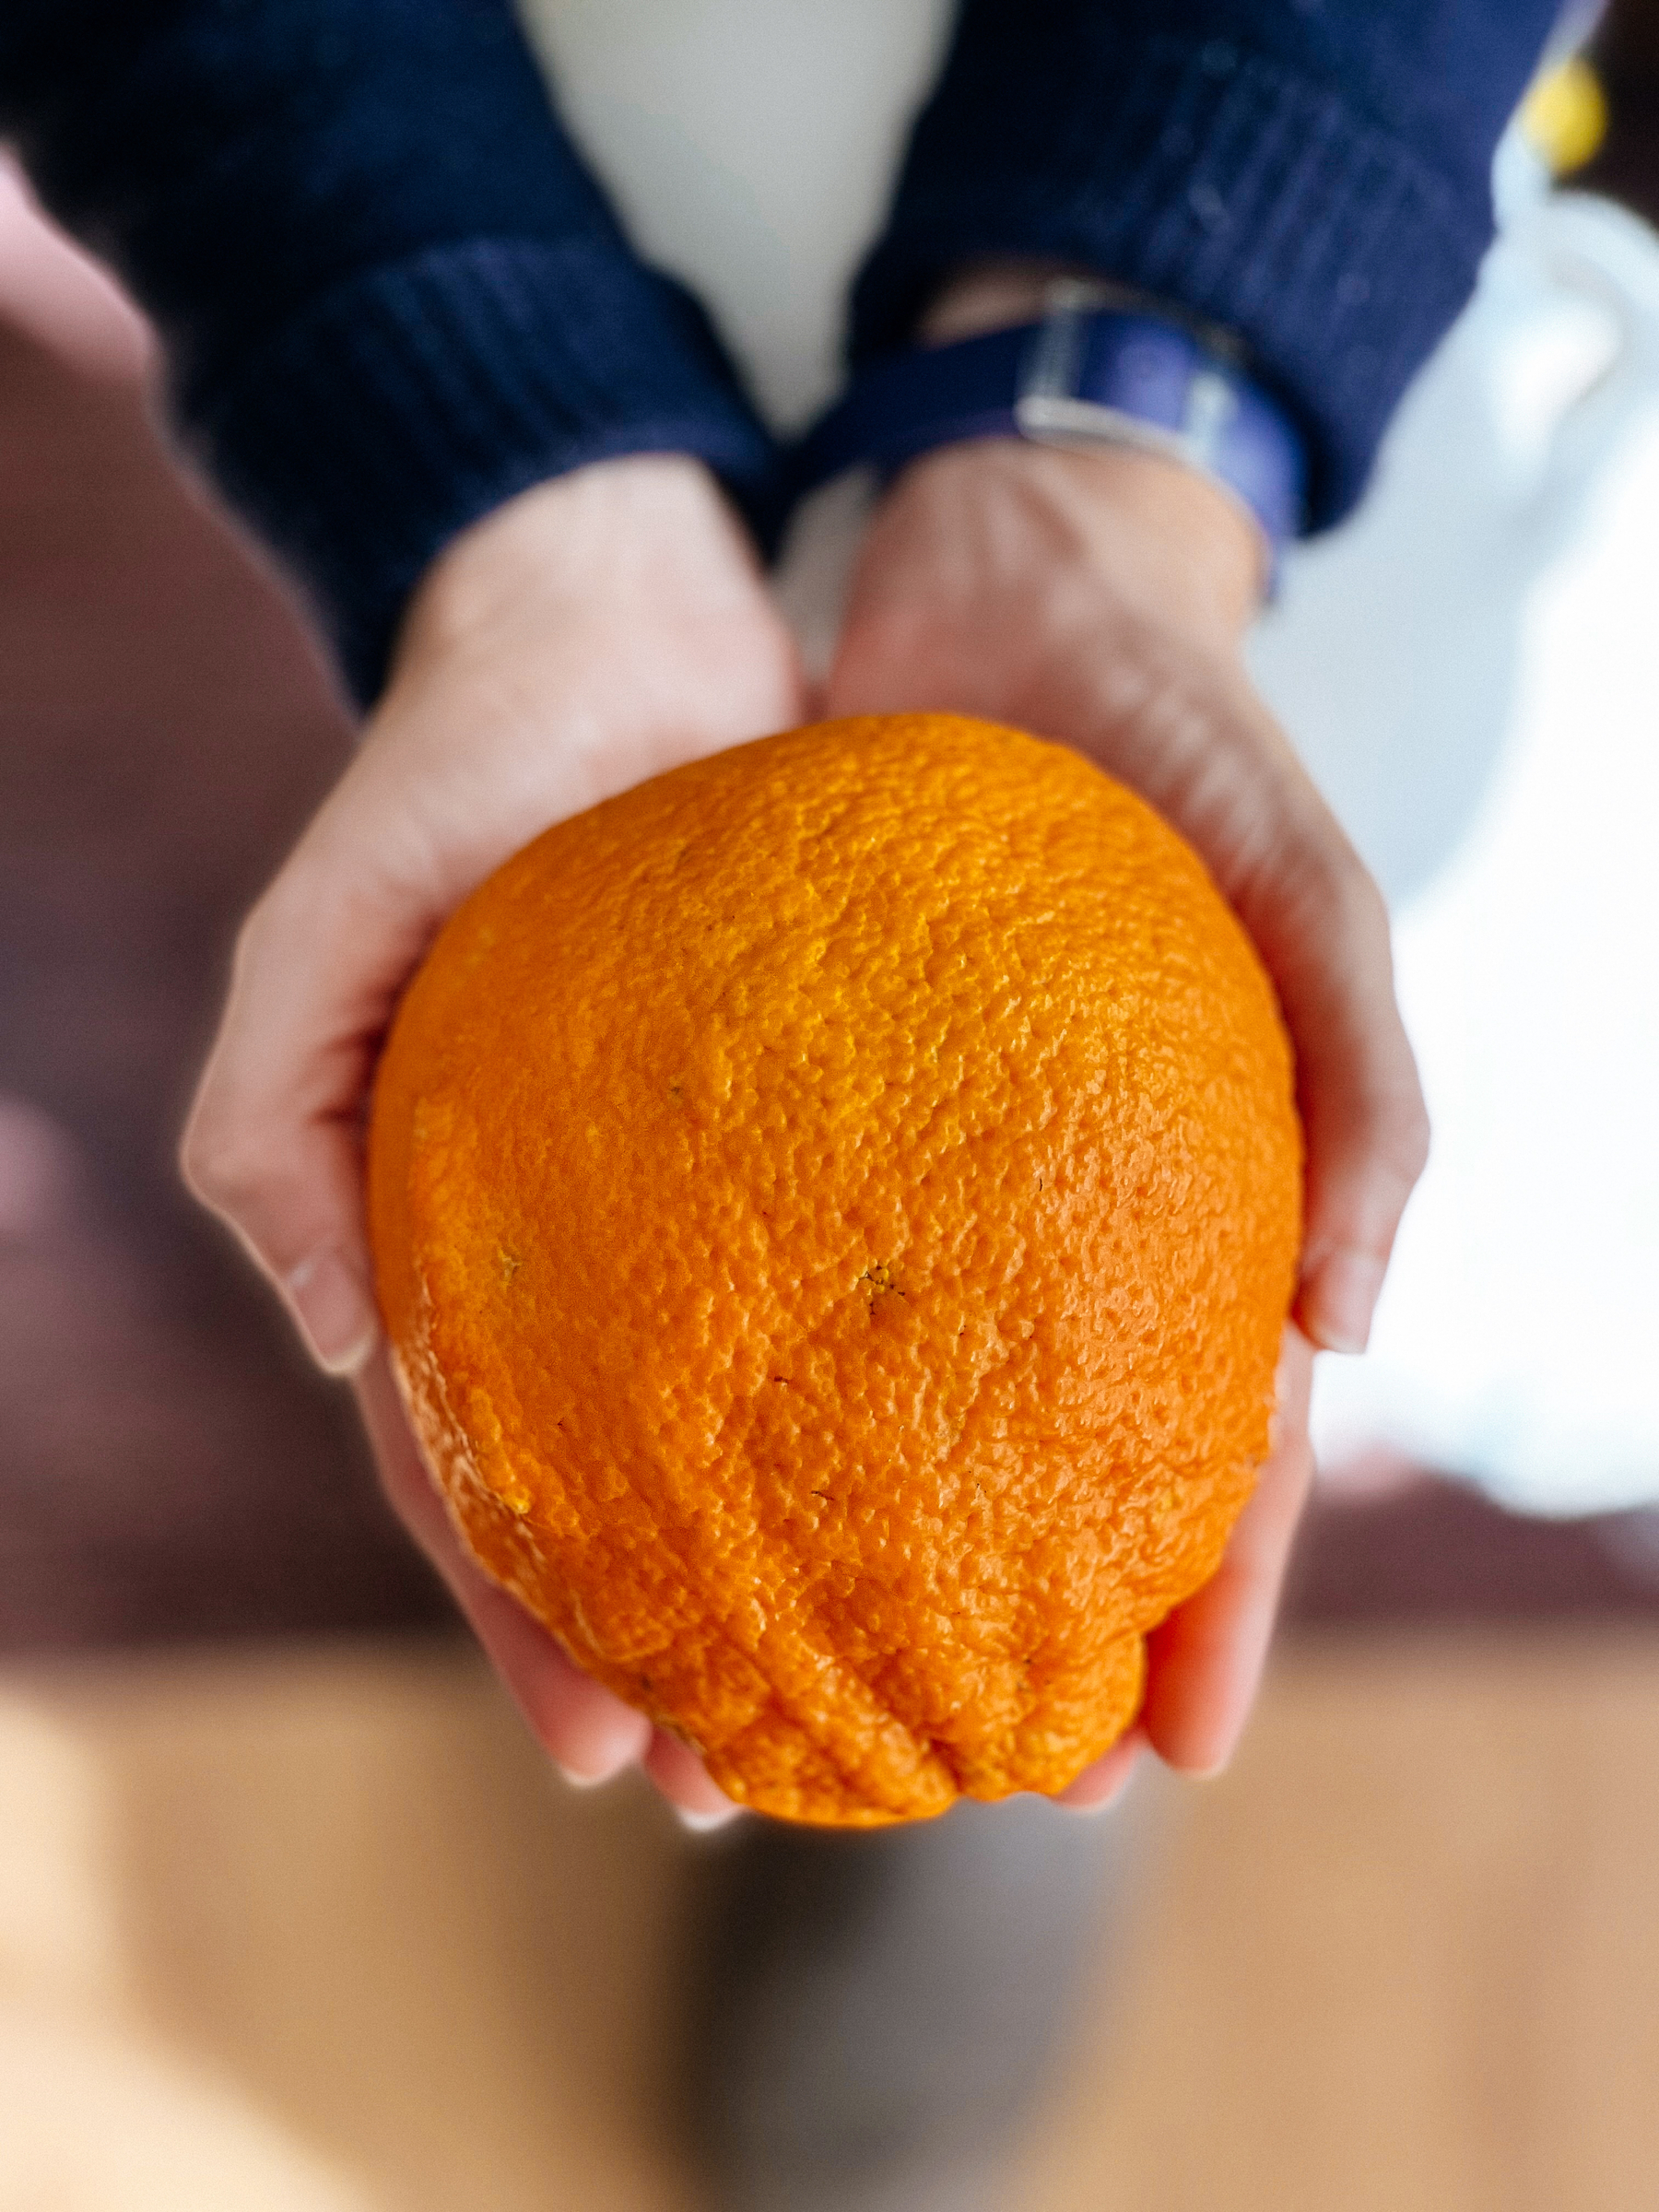 A person&rsquo;s hands holding a giant orange with a blurred background.